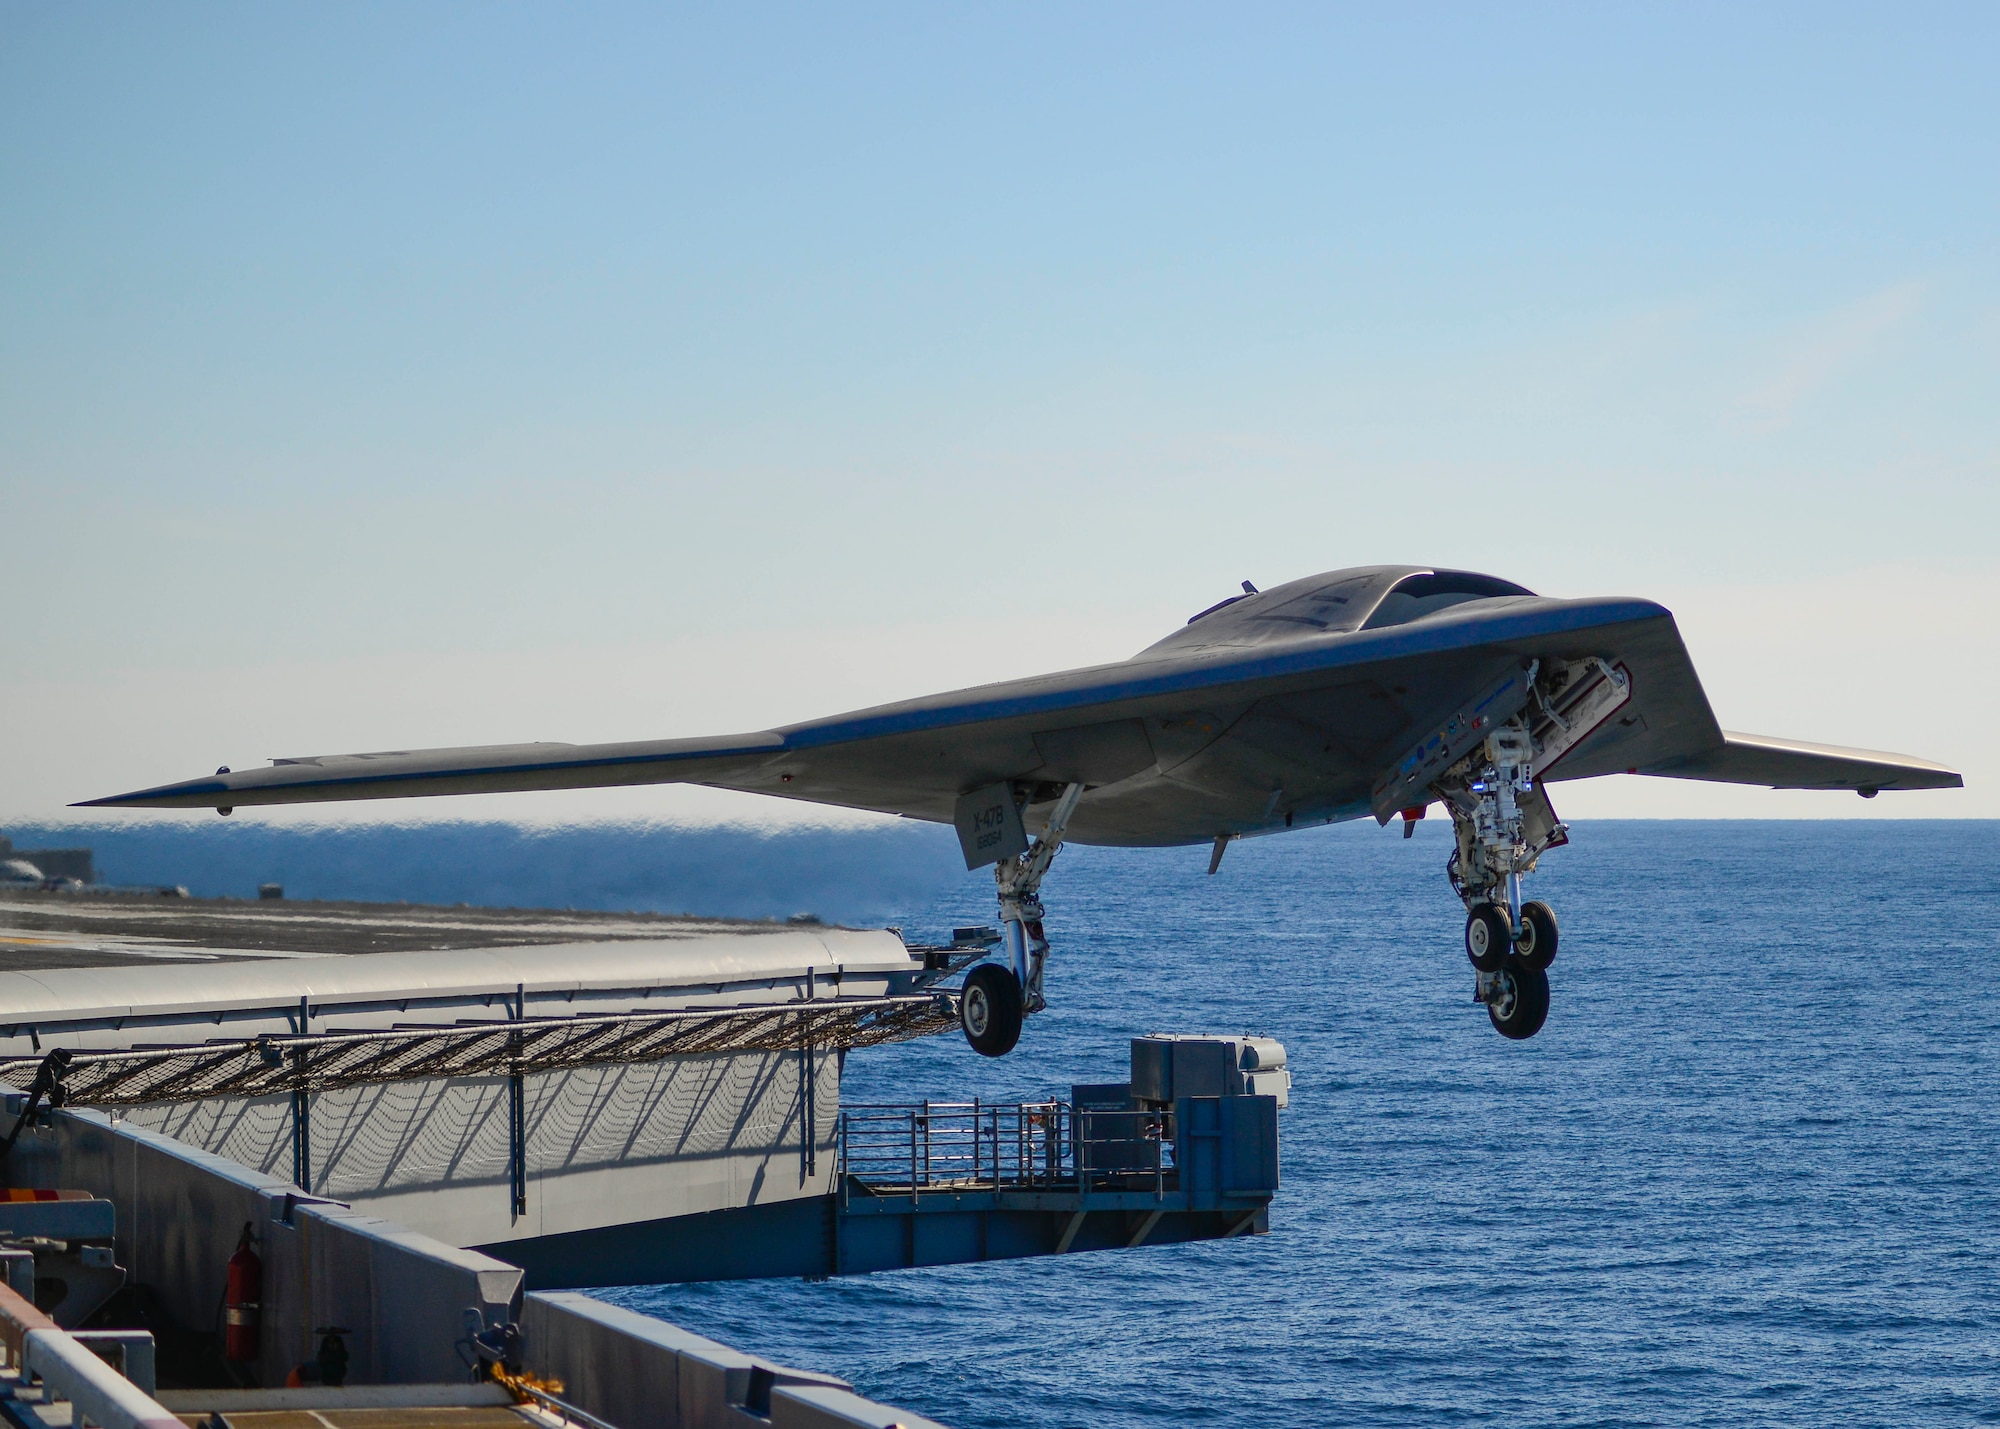 The second X-47B performs a touch-and-go onboard the USS Theodore Roosevelt during an at-sea testing period in November 2013. The aircraft performed numerous catapulted take-offs, touch-and-goes and arrested landings to demonstrate its precision approach and landing characteristics in various adverse wind conditions.  (Northrop Grumman photo by Alan Radecki)